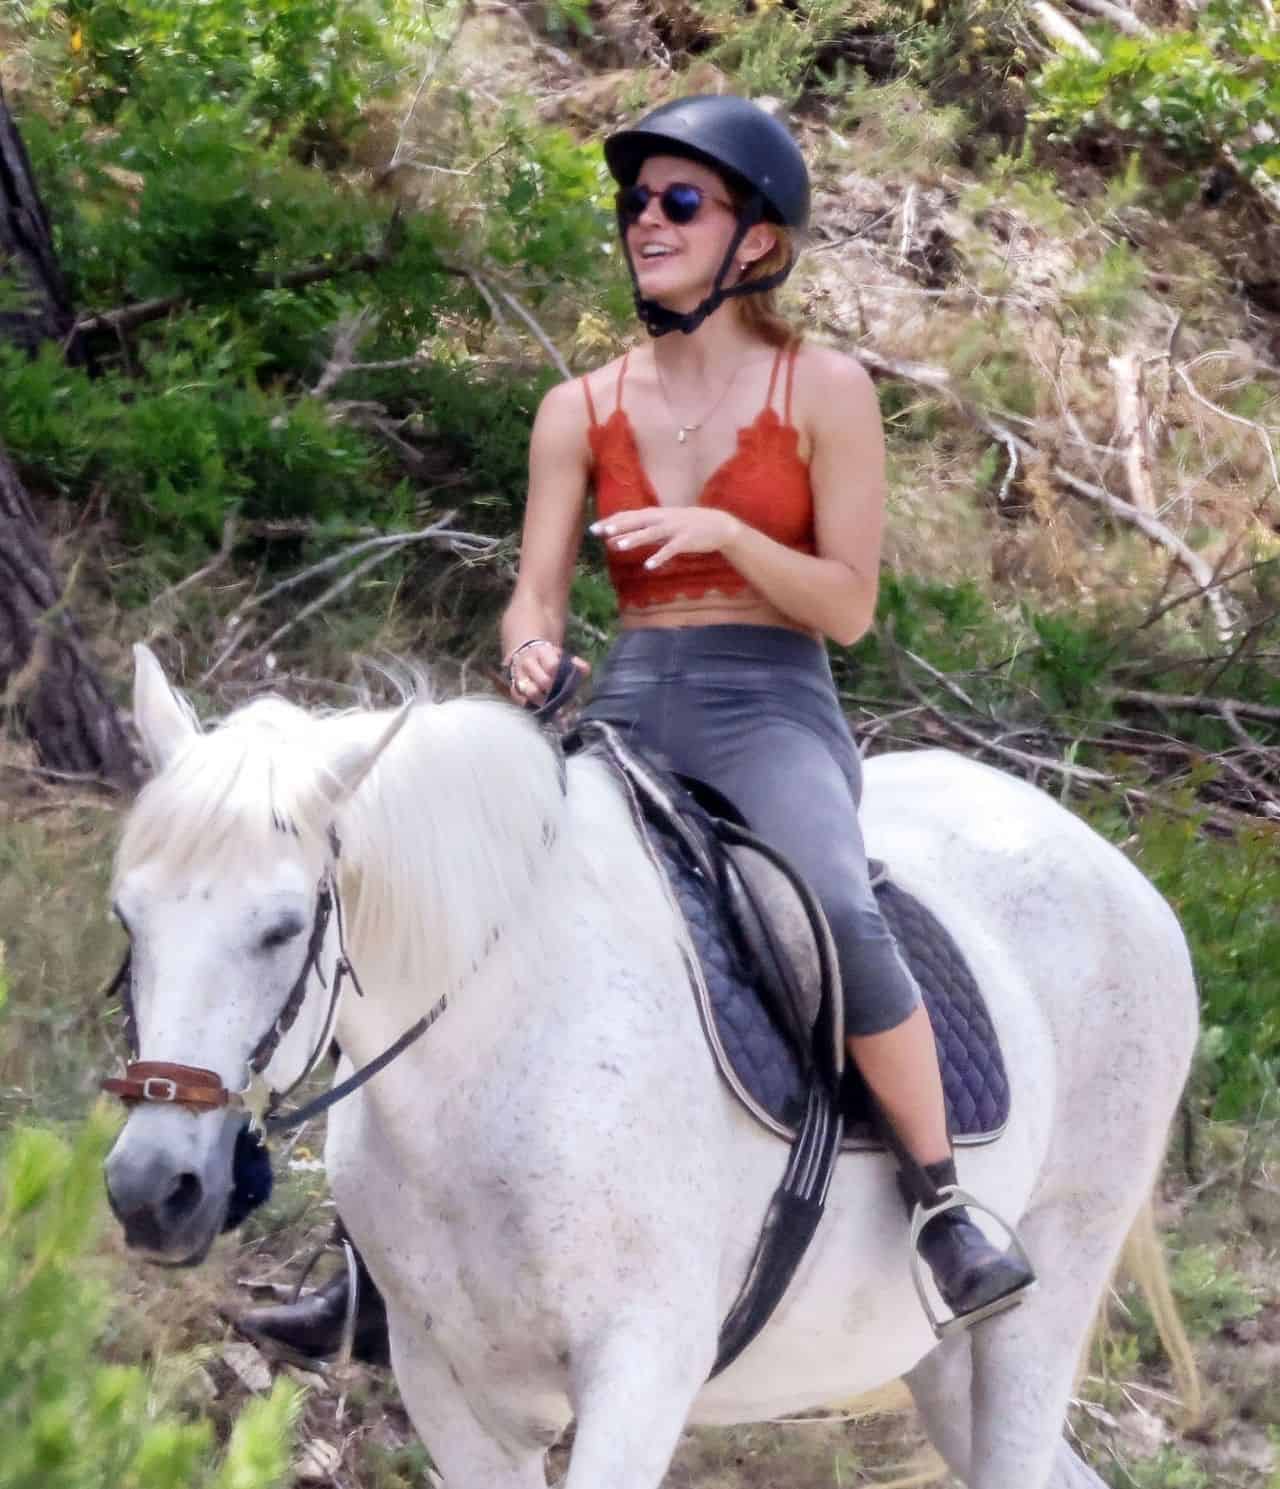 Emma Watson Wore a Lace Bralette as She was on a Horseback Ride in Ibiza